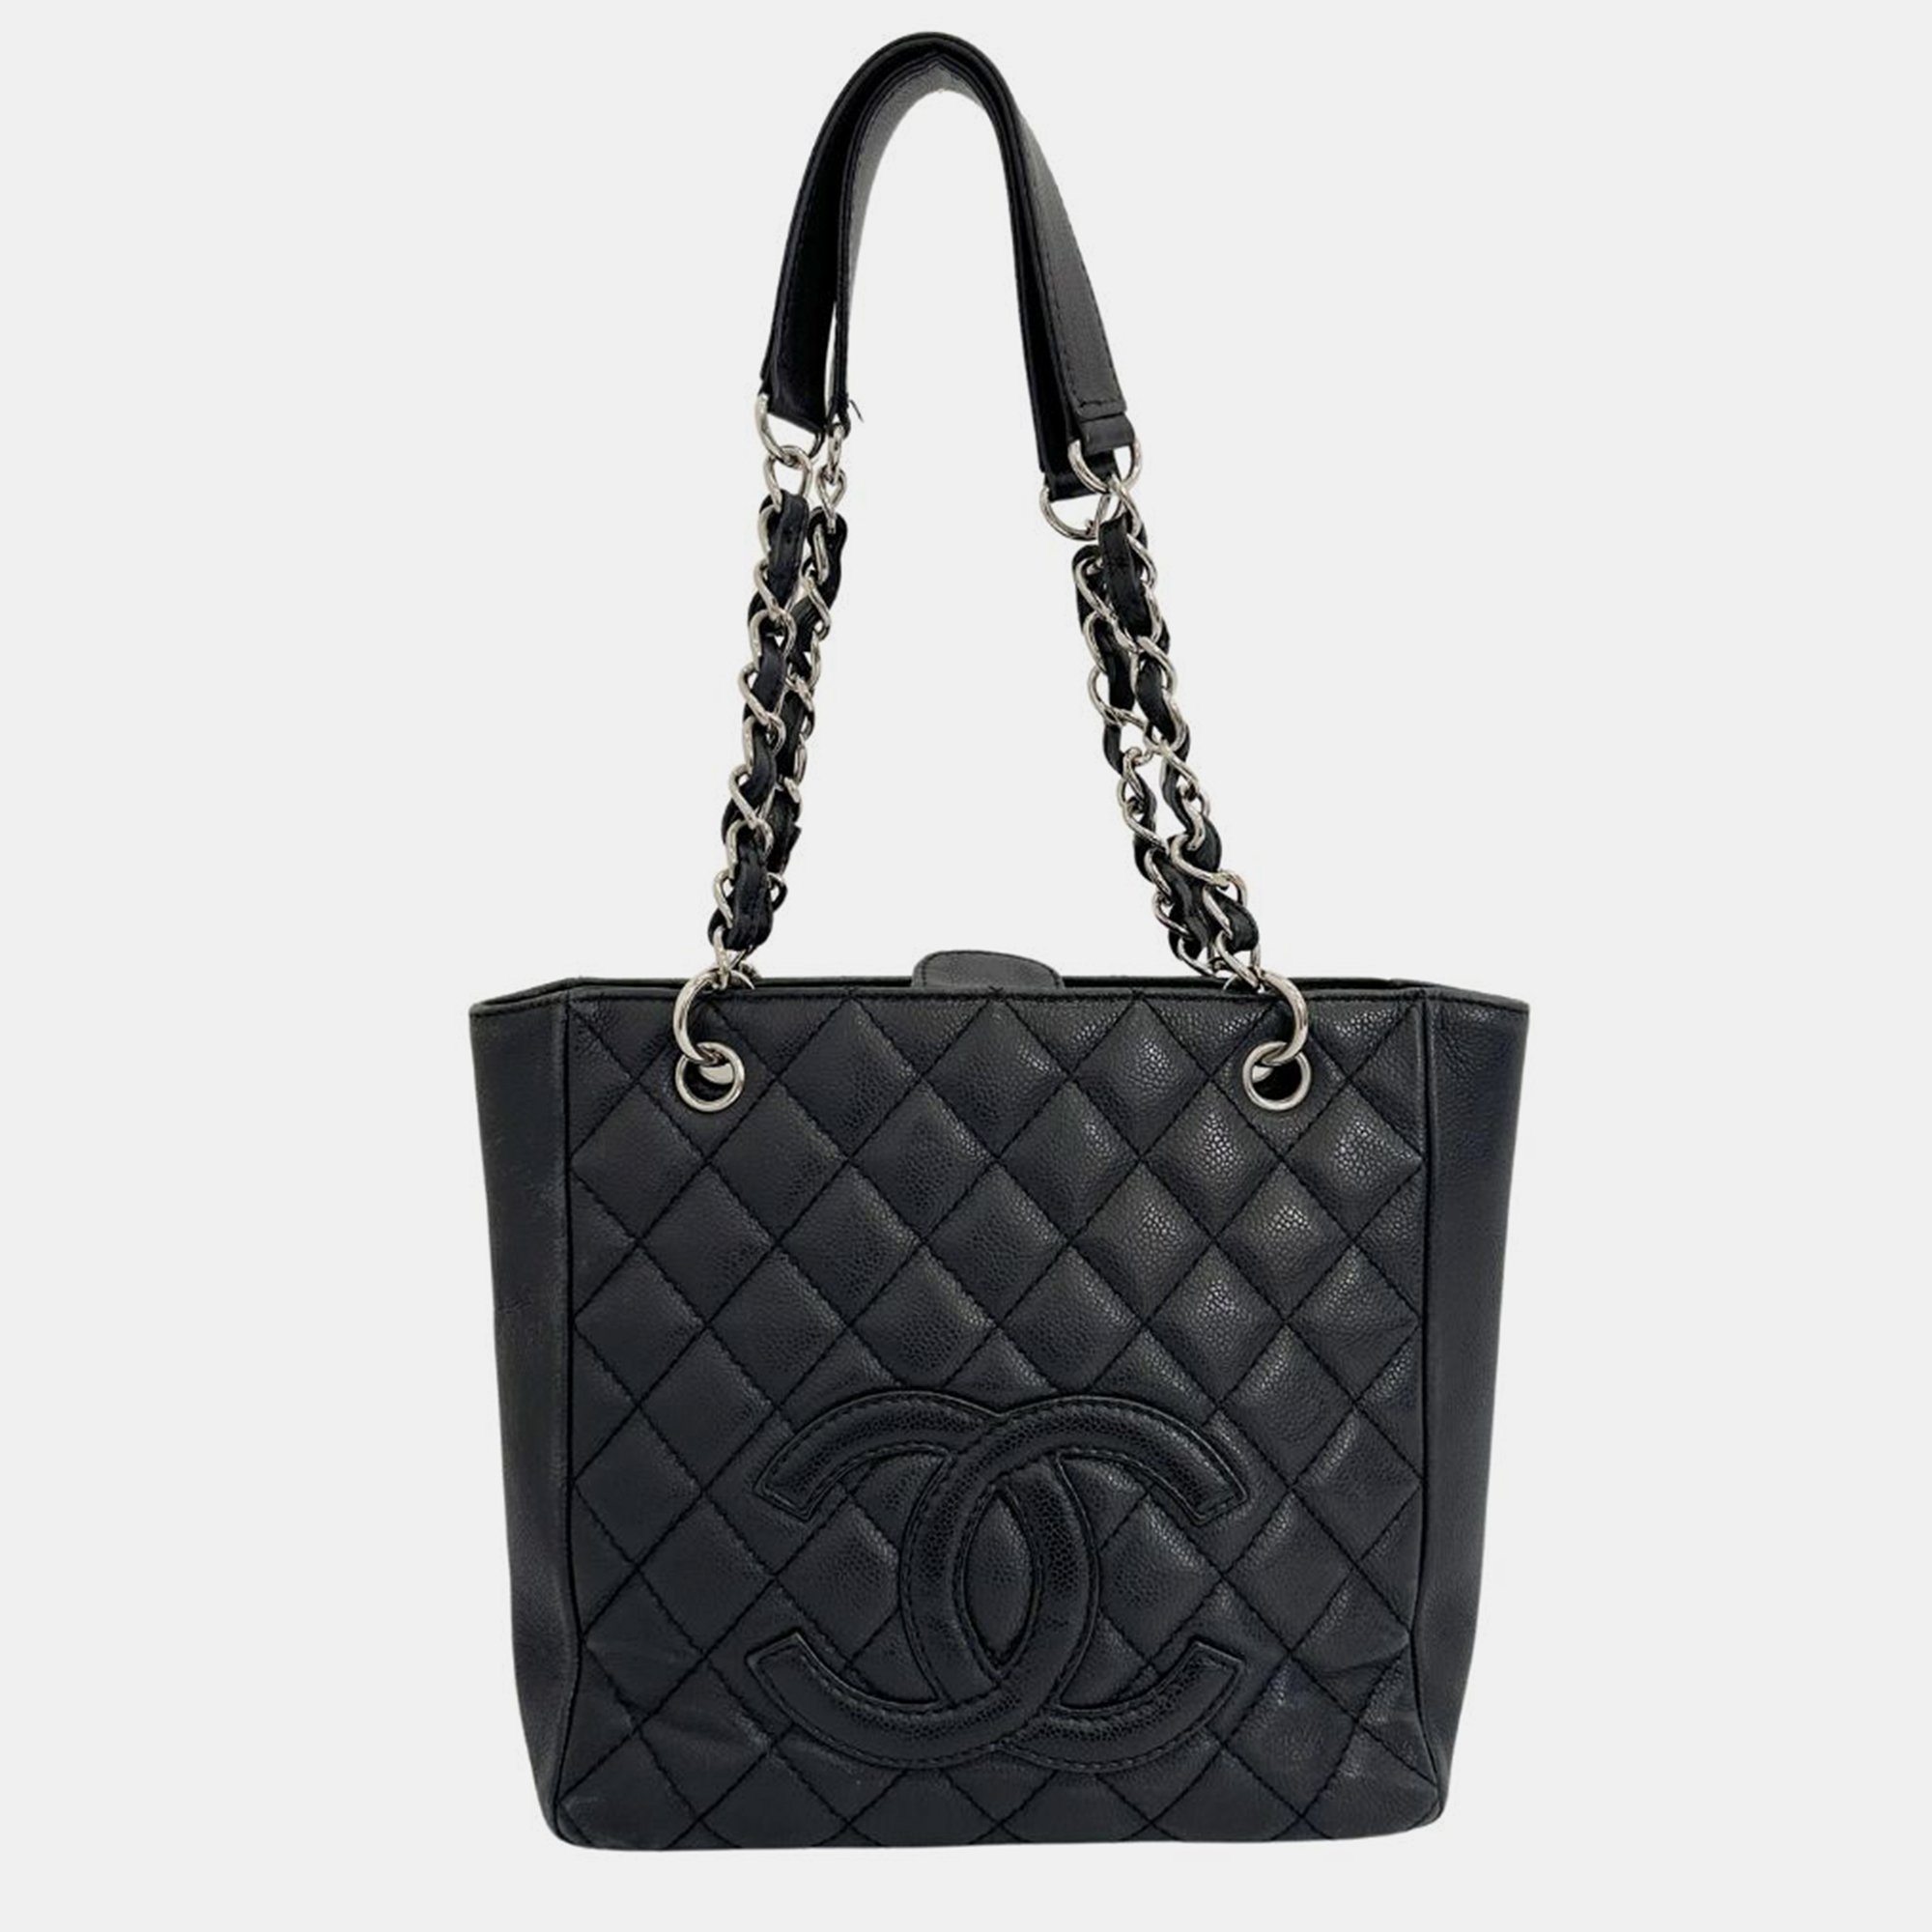 

Chanel Black Caviar Leather Grand Shopping Tote Bag